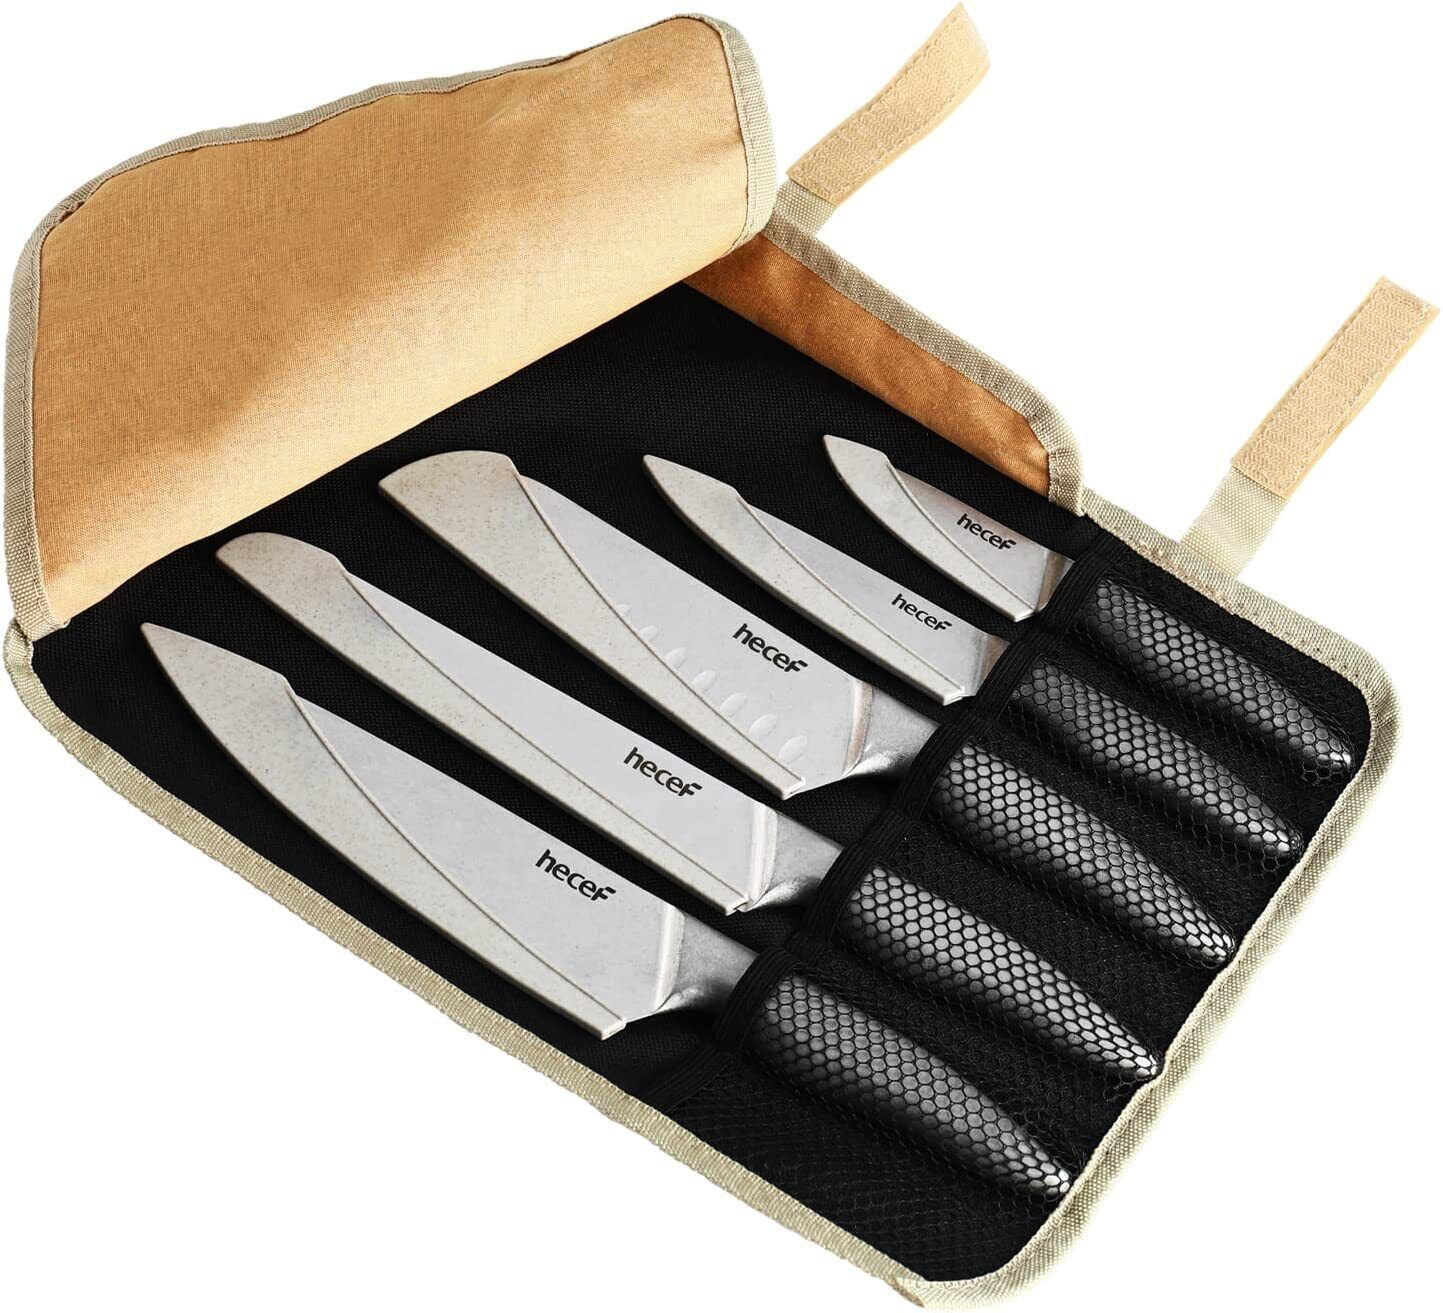 hecef Kitchen Knife Set with Magnetic Strip, 6 pcs Professional Knives Set  for Kitchen, 13-inch Magnetic Strip Stainless Steel Sharp Chef Knife Set